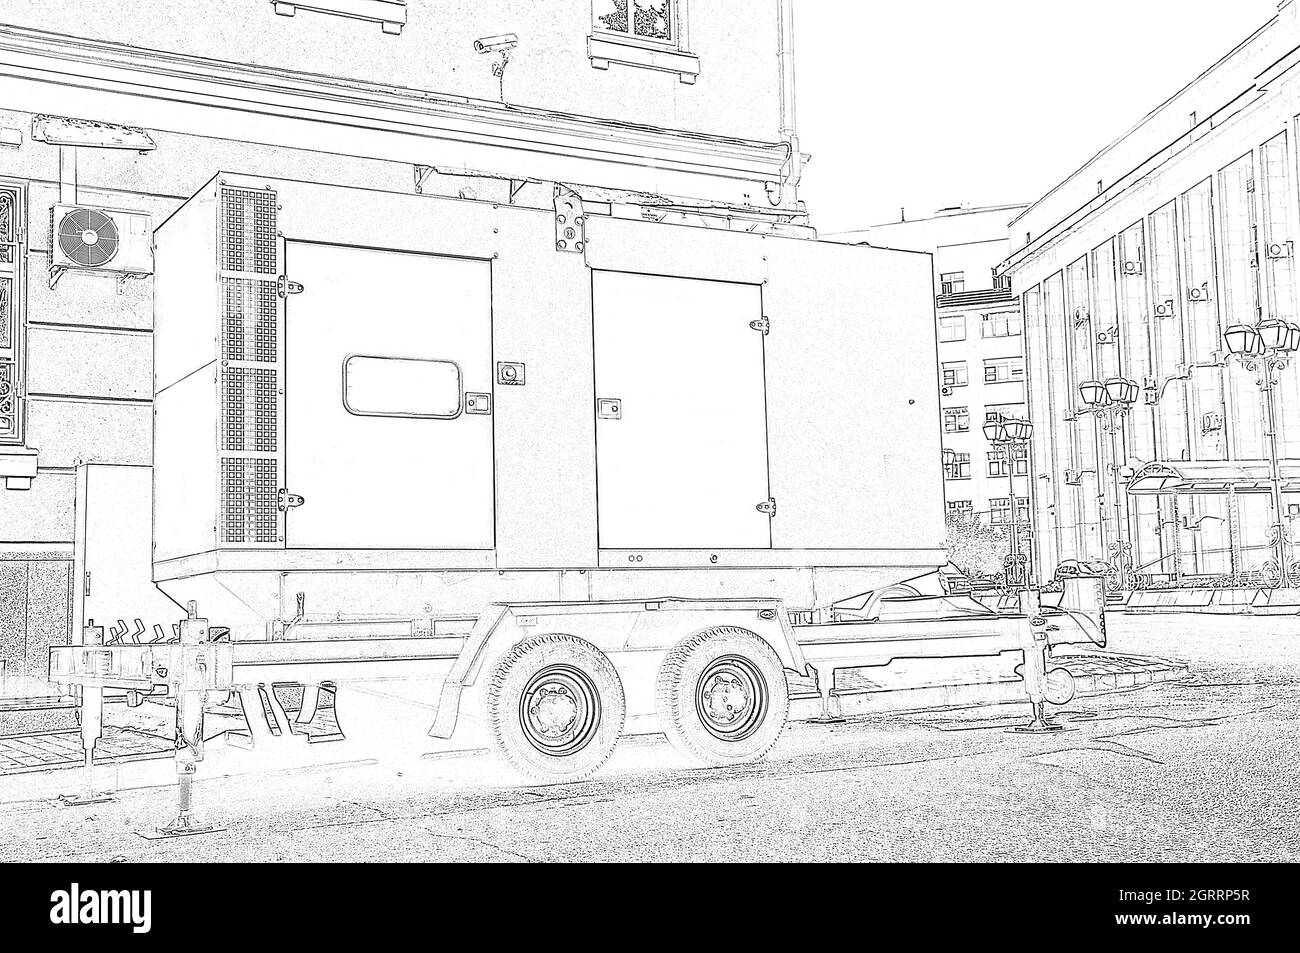 Standby mobile diesel generator for power supply of an office building.  Sketch Stock Photo - Alamy